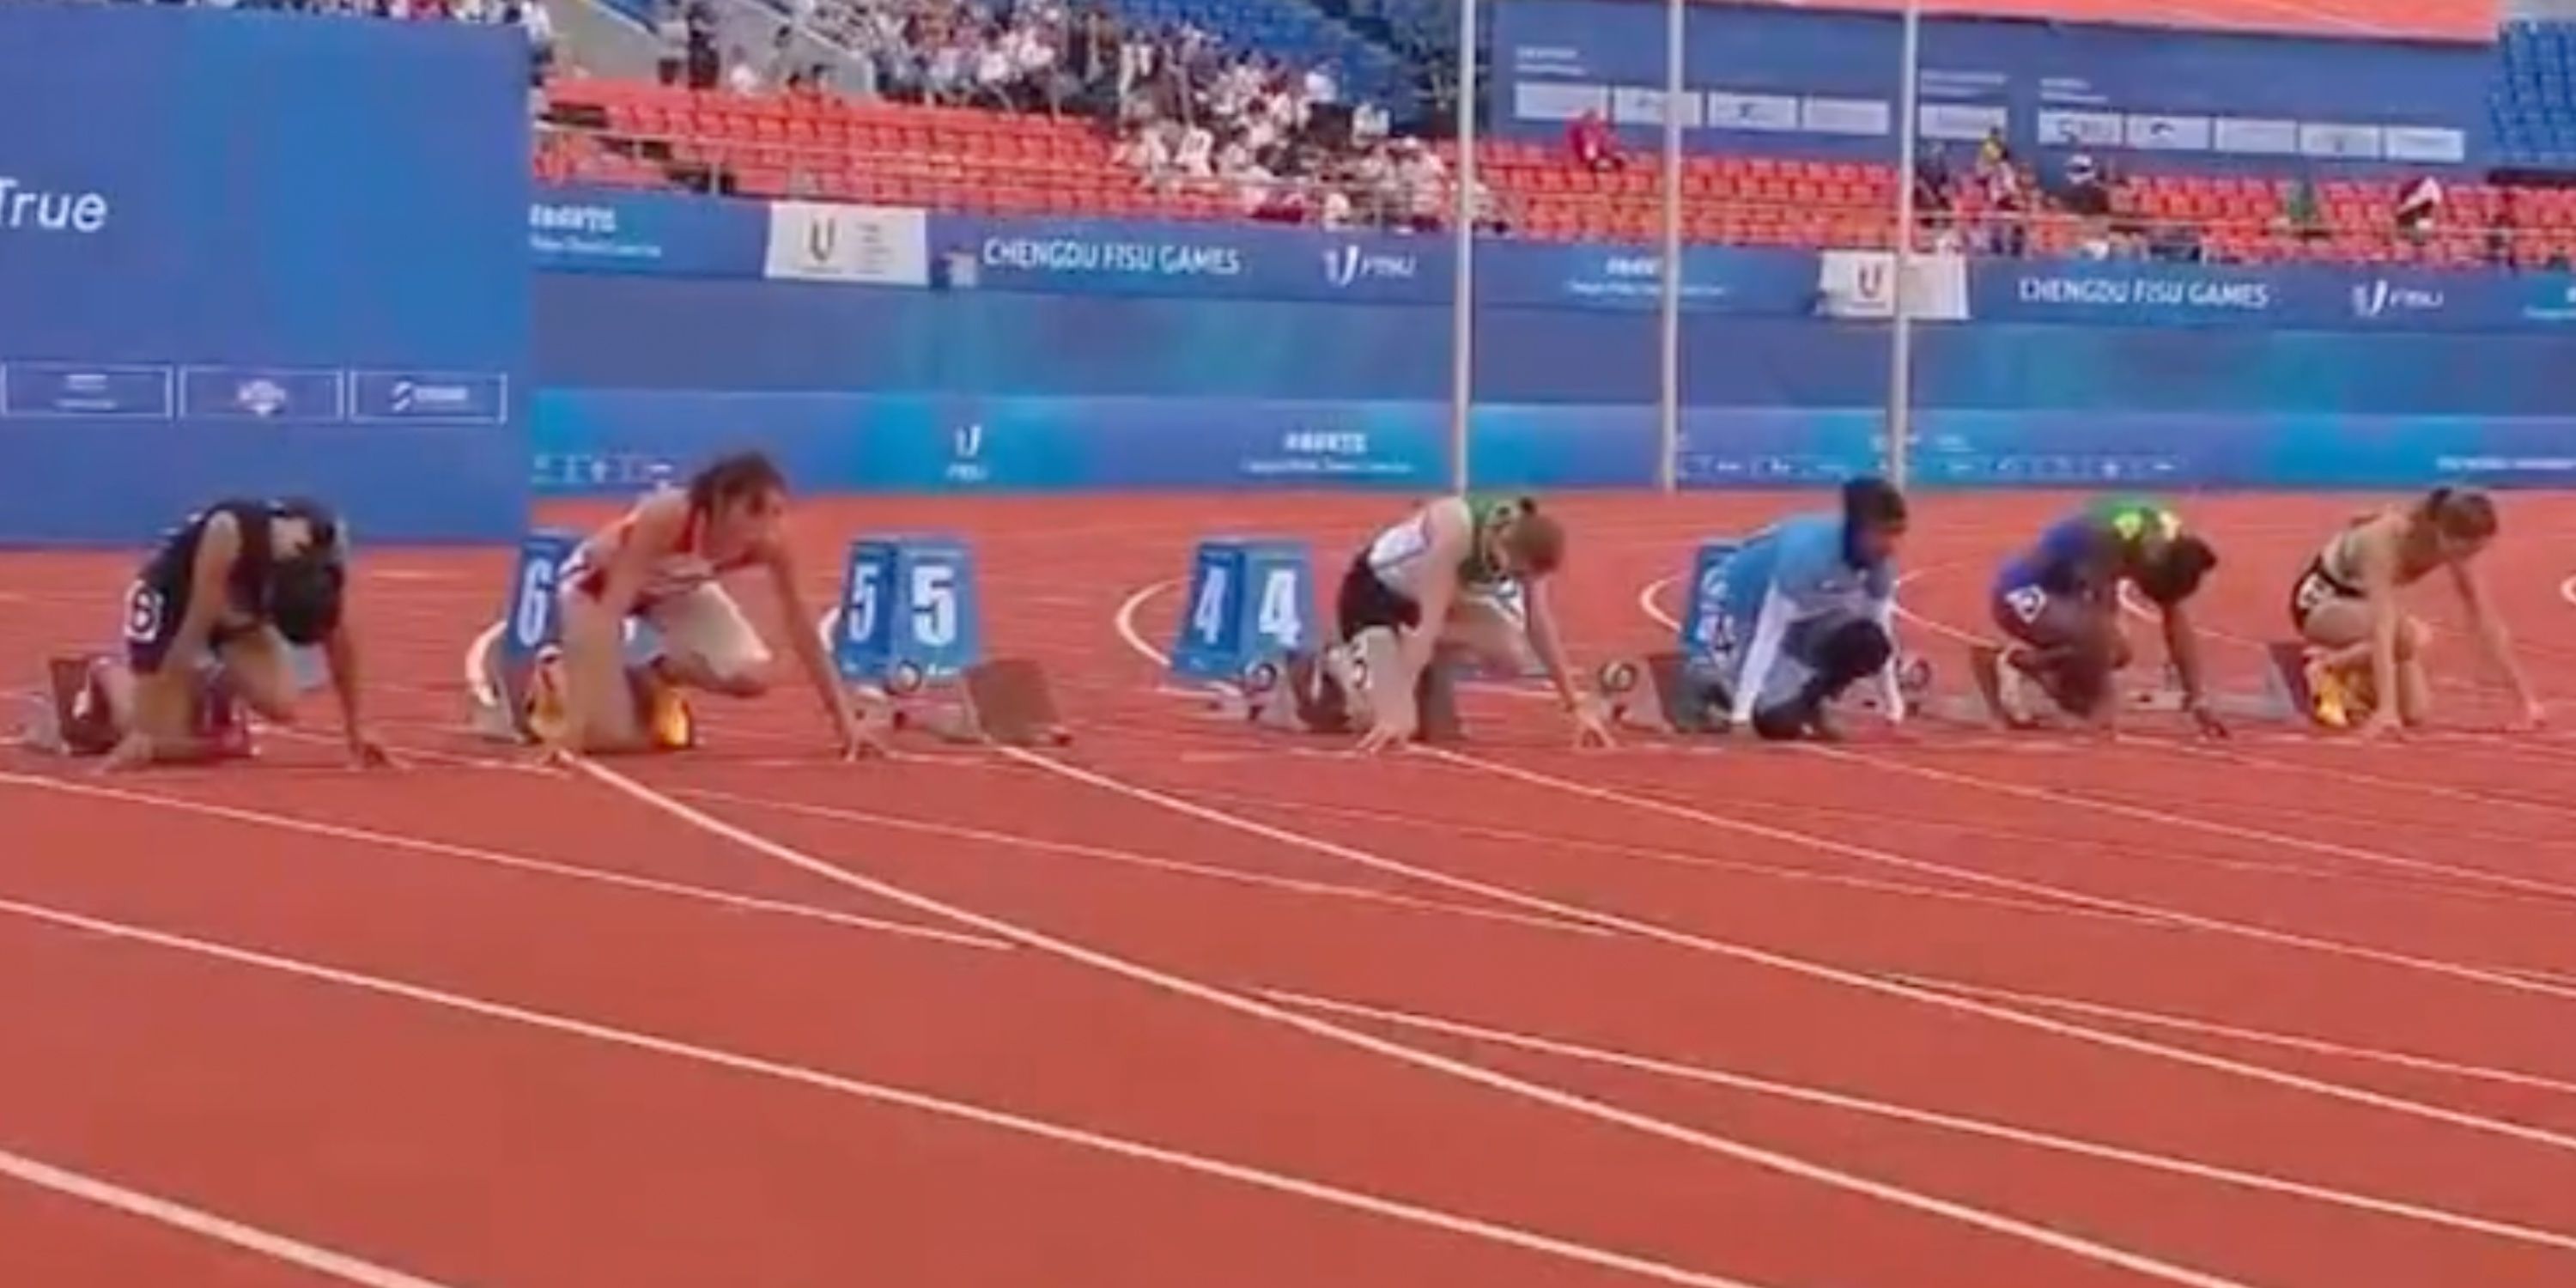 Investigation launched after Somali runner's ‘embarrassing’ 100m at World University Games